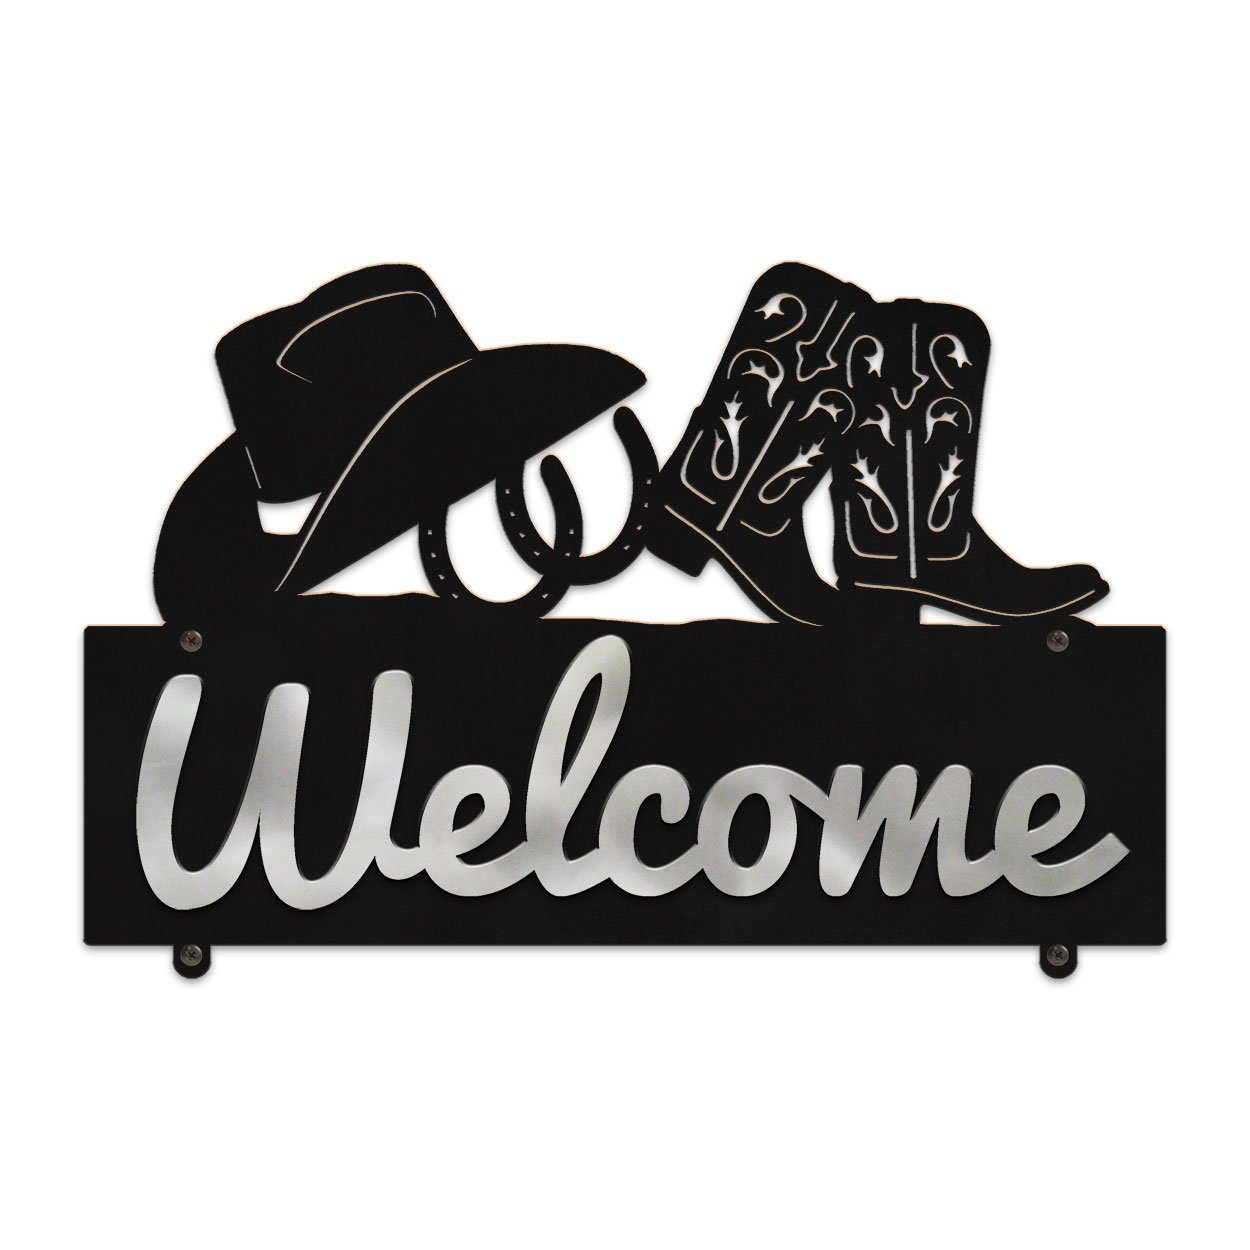 607048 - Cowboy Boots with Hat and Horseshoes Design Horizontal Metal Welcome Wall Plaque